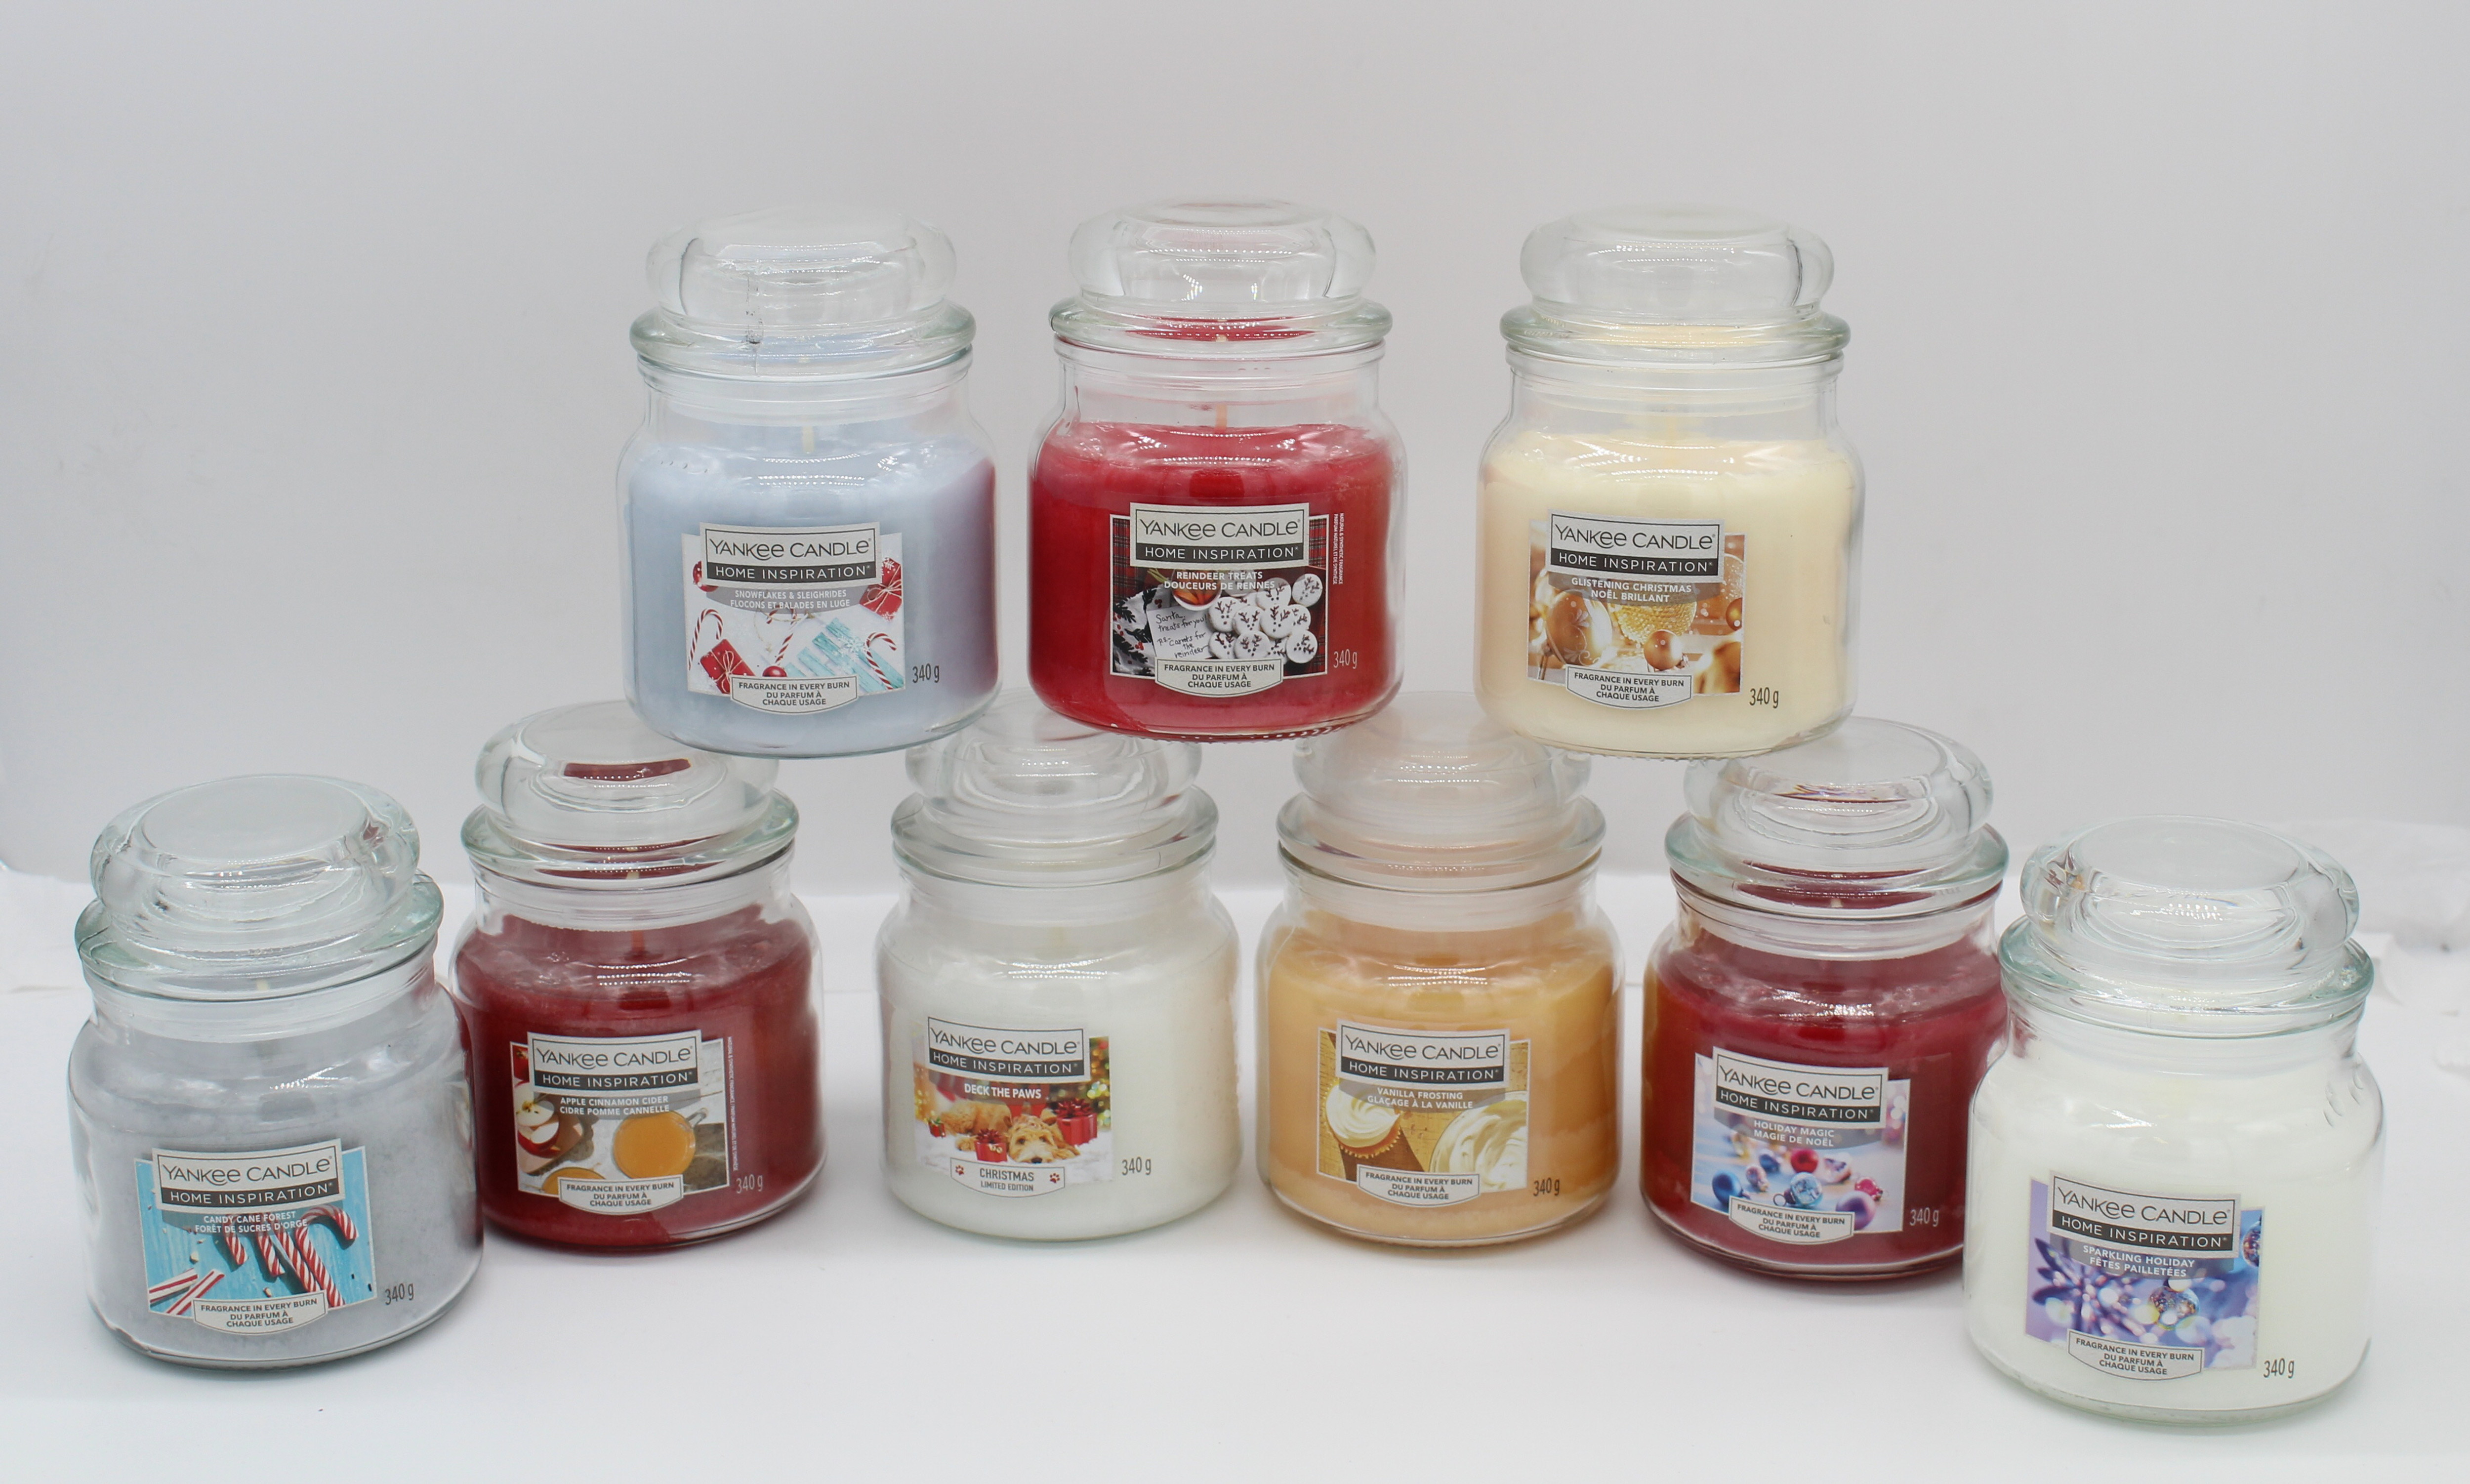 https://cdn11.bigcommerce.com/s-sryyqnw5ff/images/stencil/5000x5000/products/1422/4374/Xmas_yankee_candles_med_jars01_-_Copy__86172.1698239388.jpg?c=2